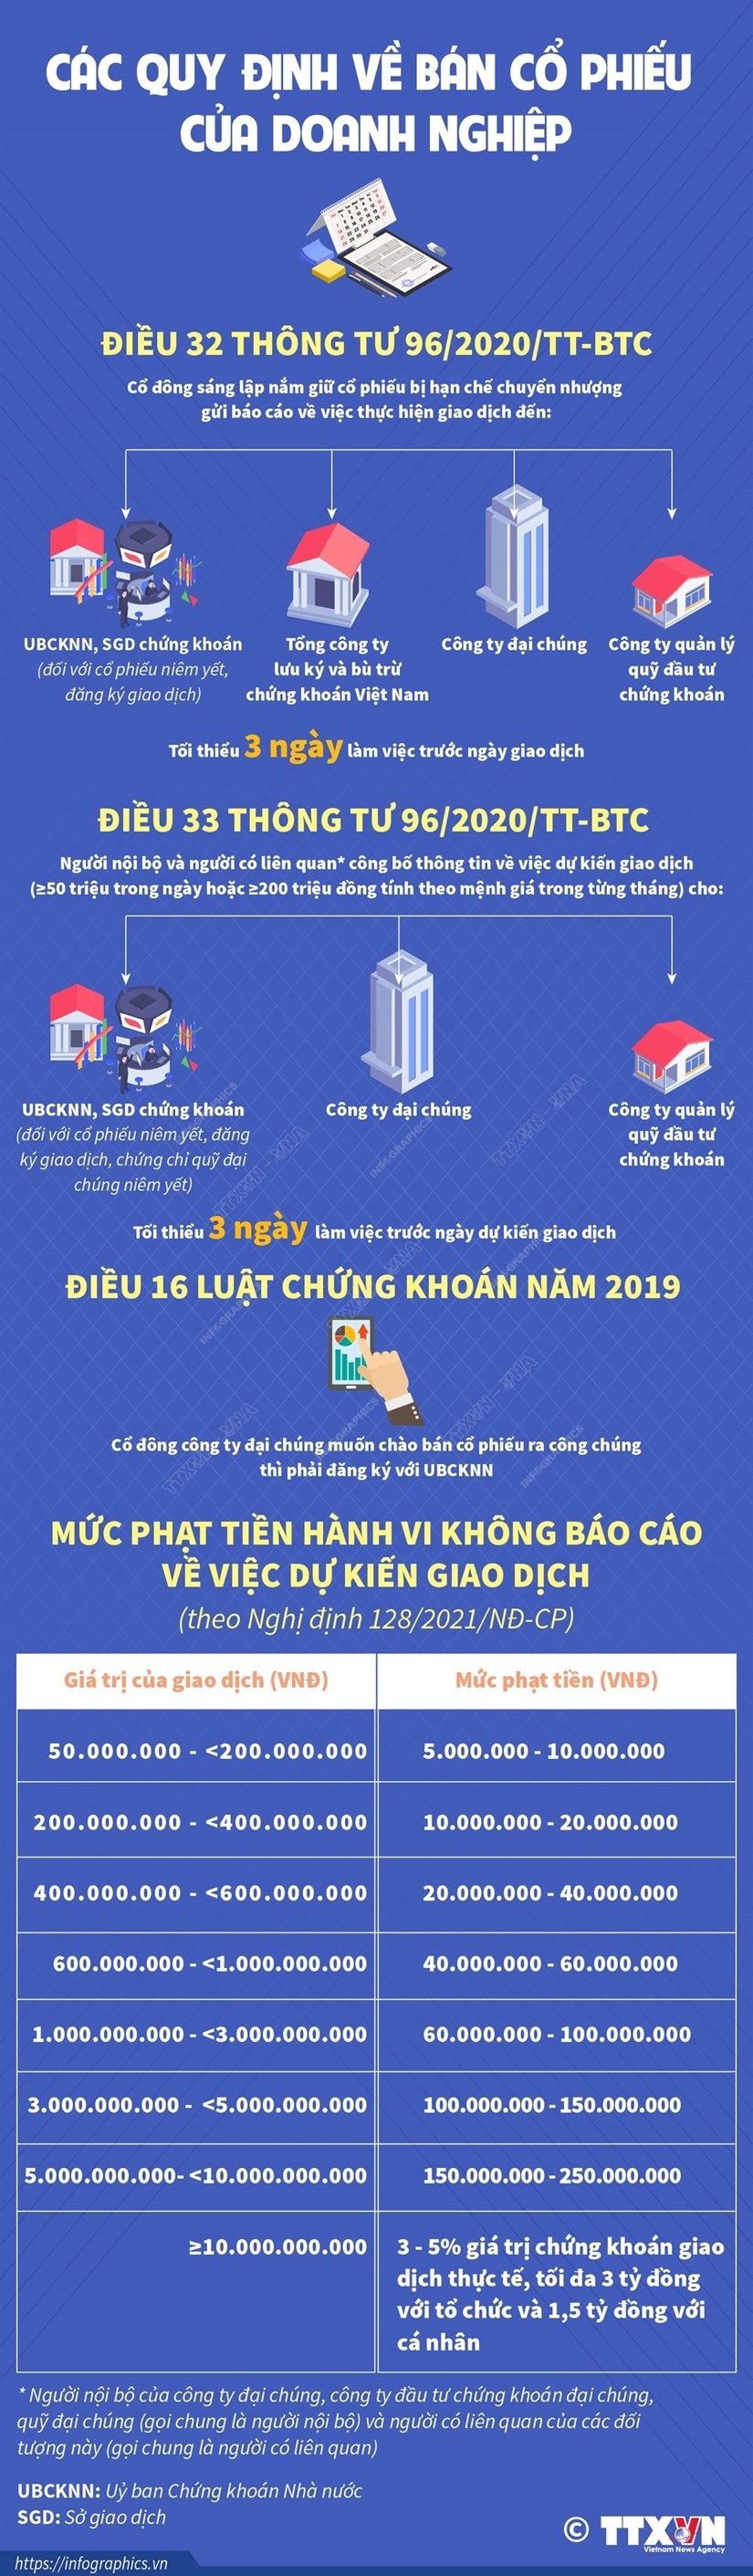 cac quy dinh ve ban co phieu cua doanh nghiep